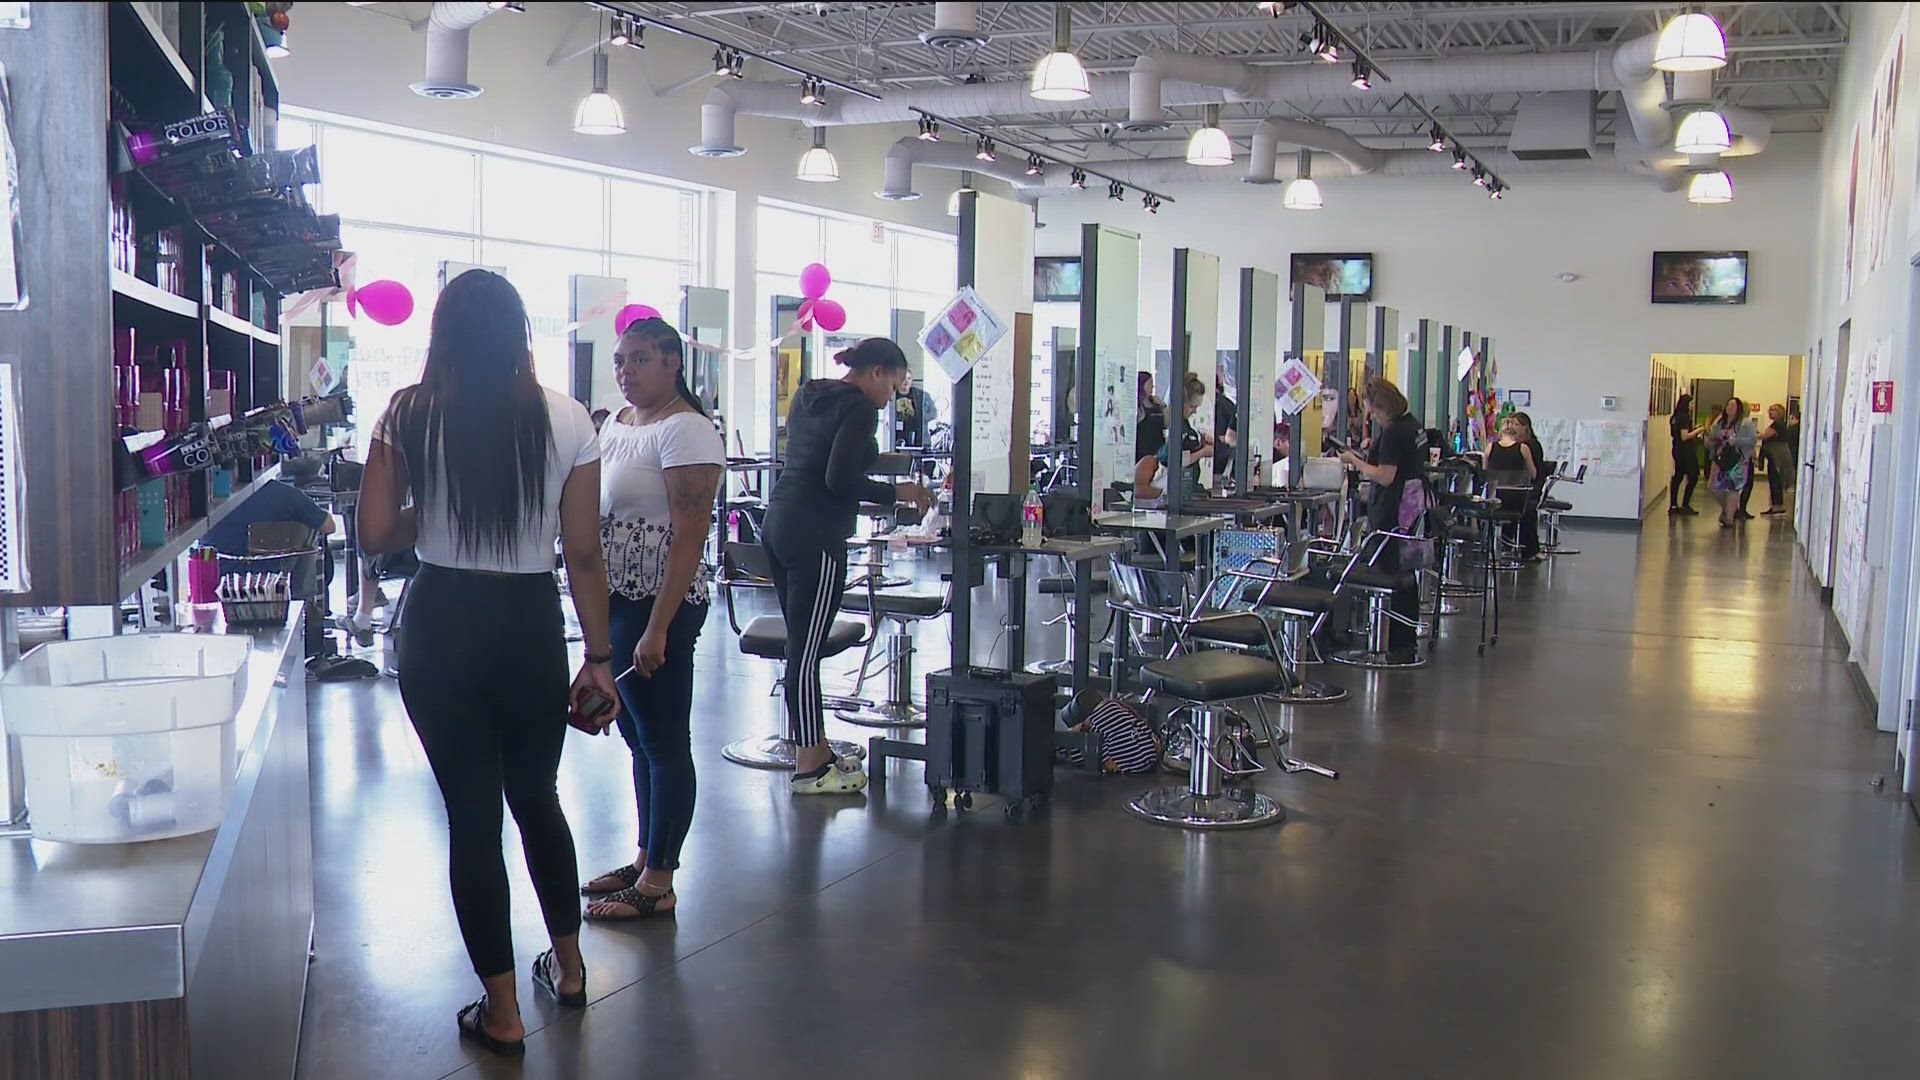 The Paul Mitchell School in Toledo is providing free services to cancer survivors, including services like manicures.